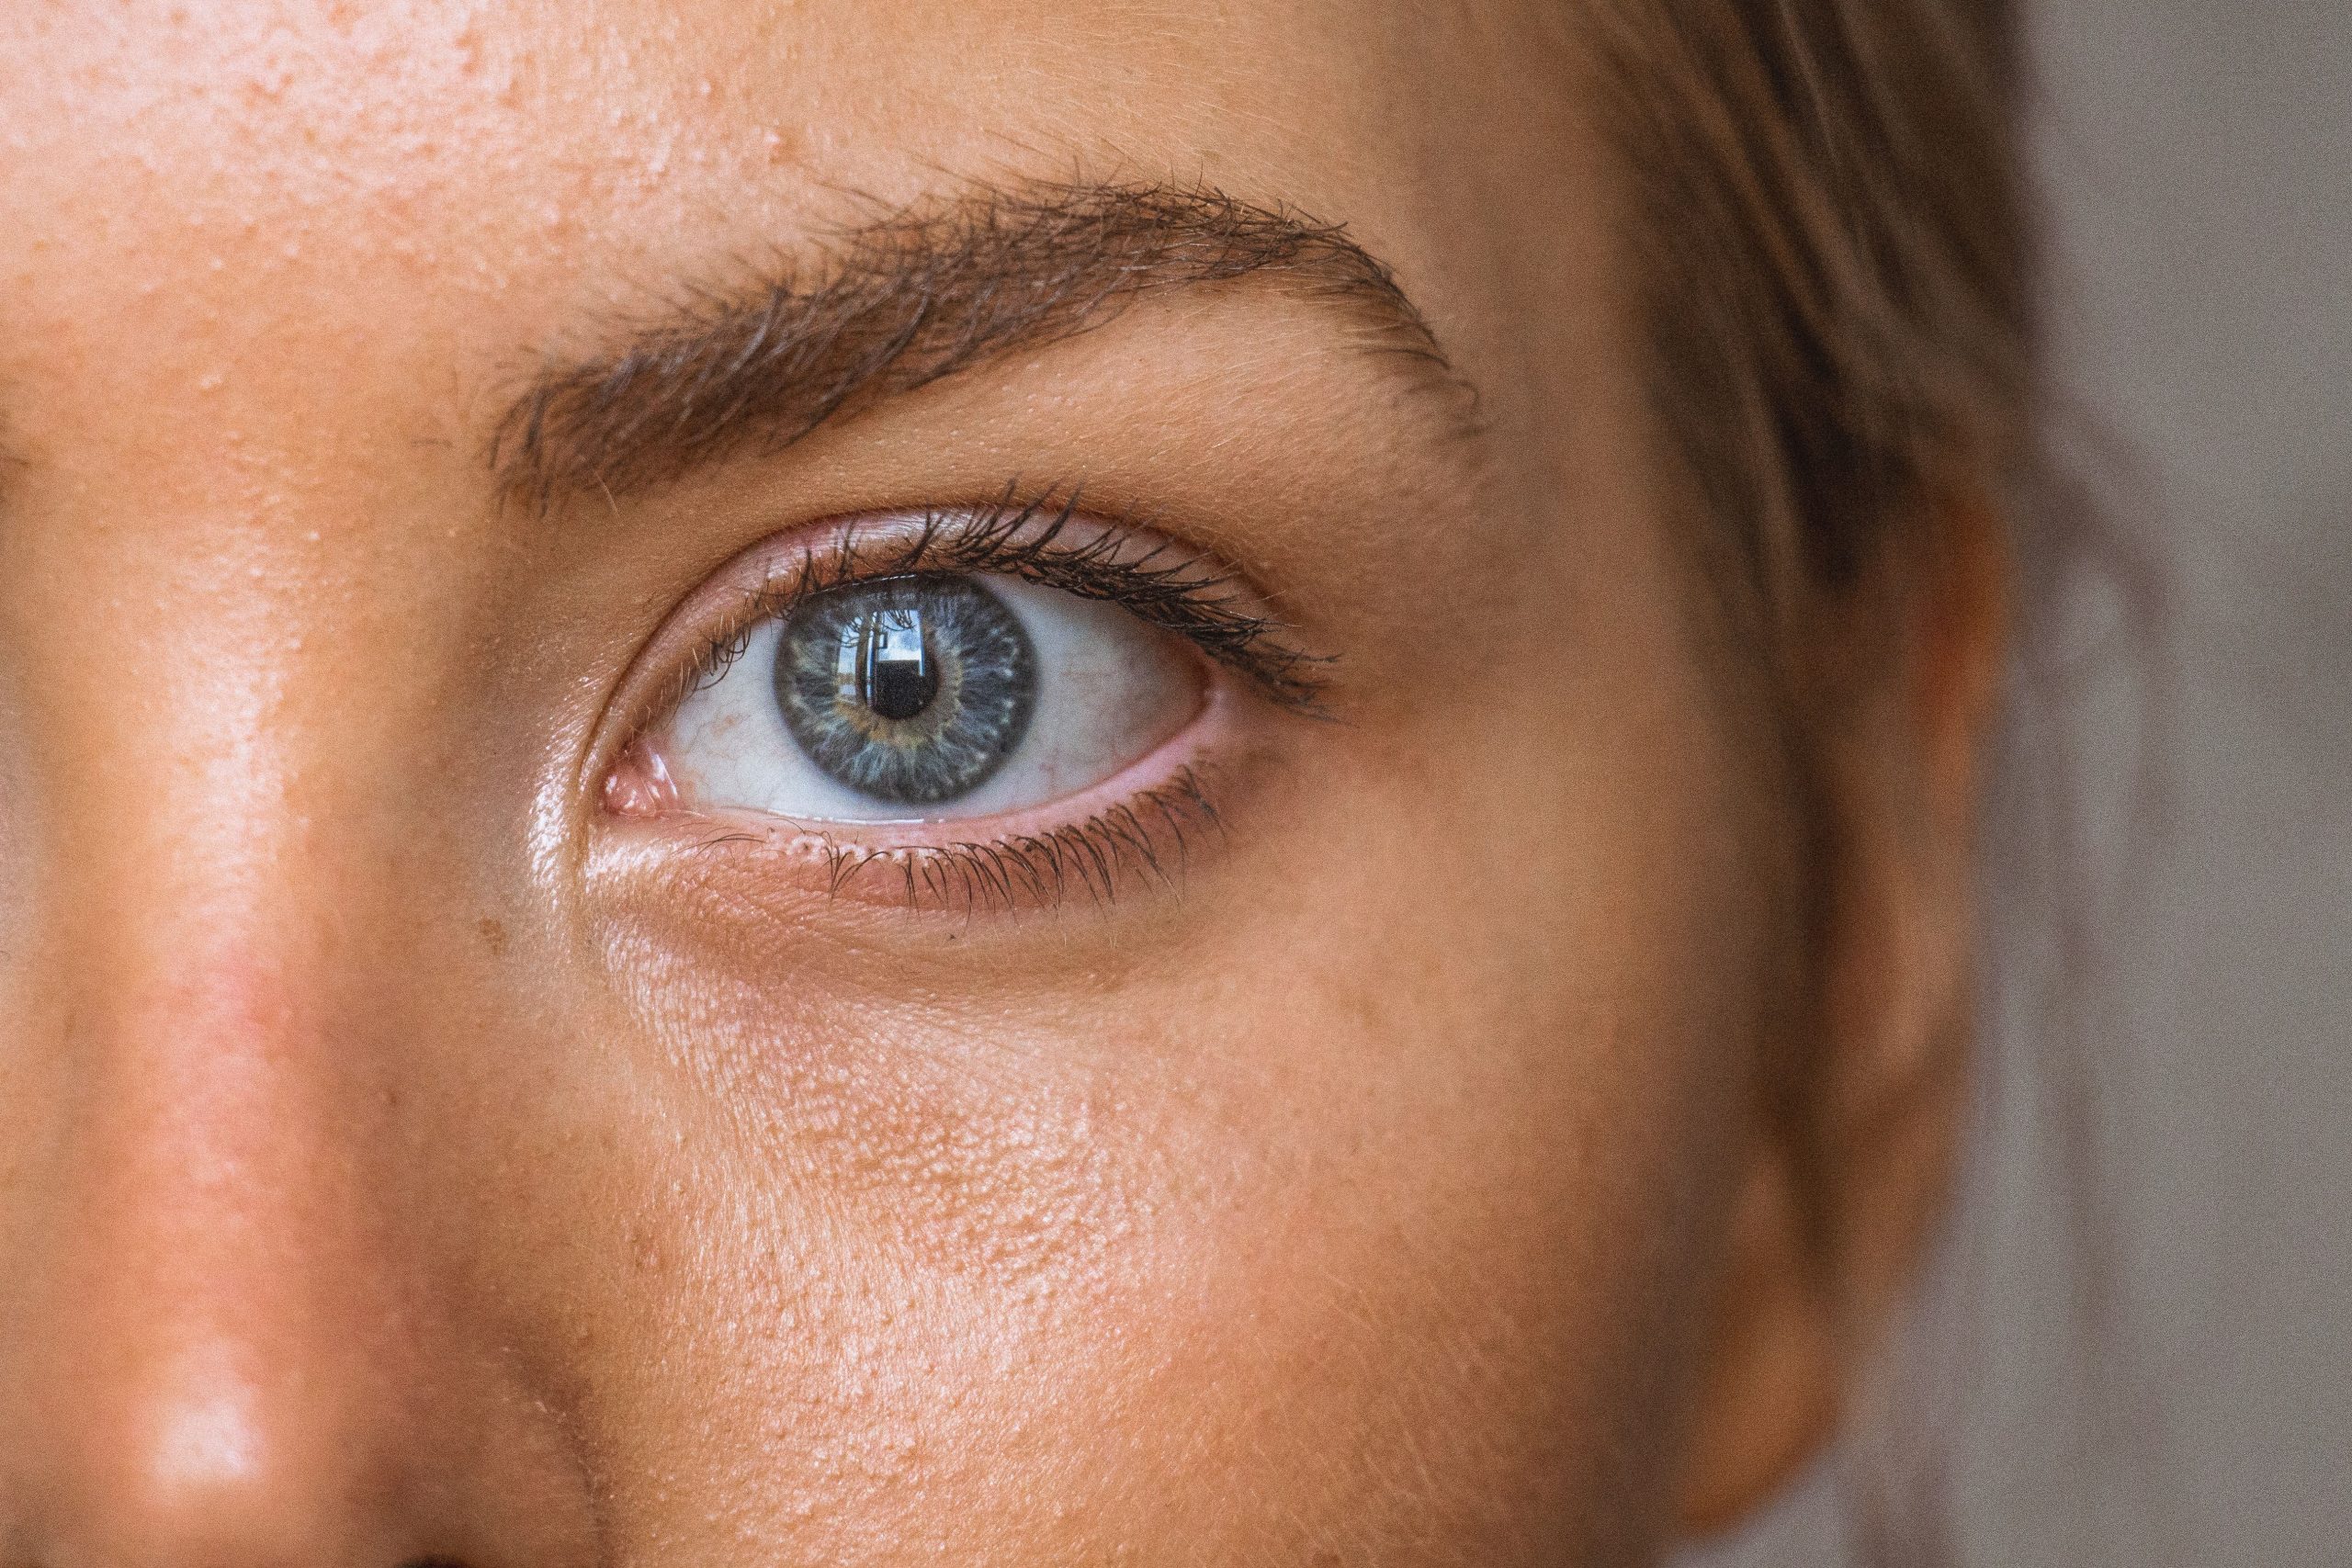 Heres how you can reduce puffiness around the eyes